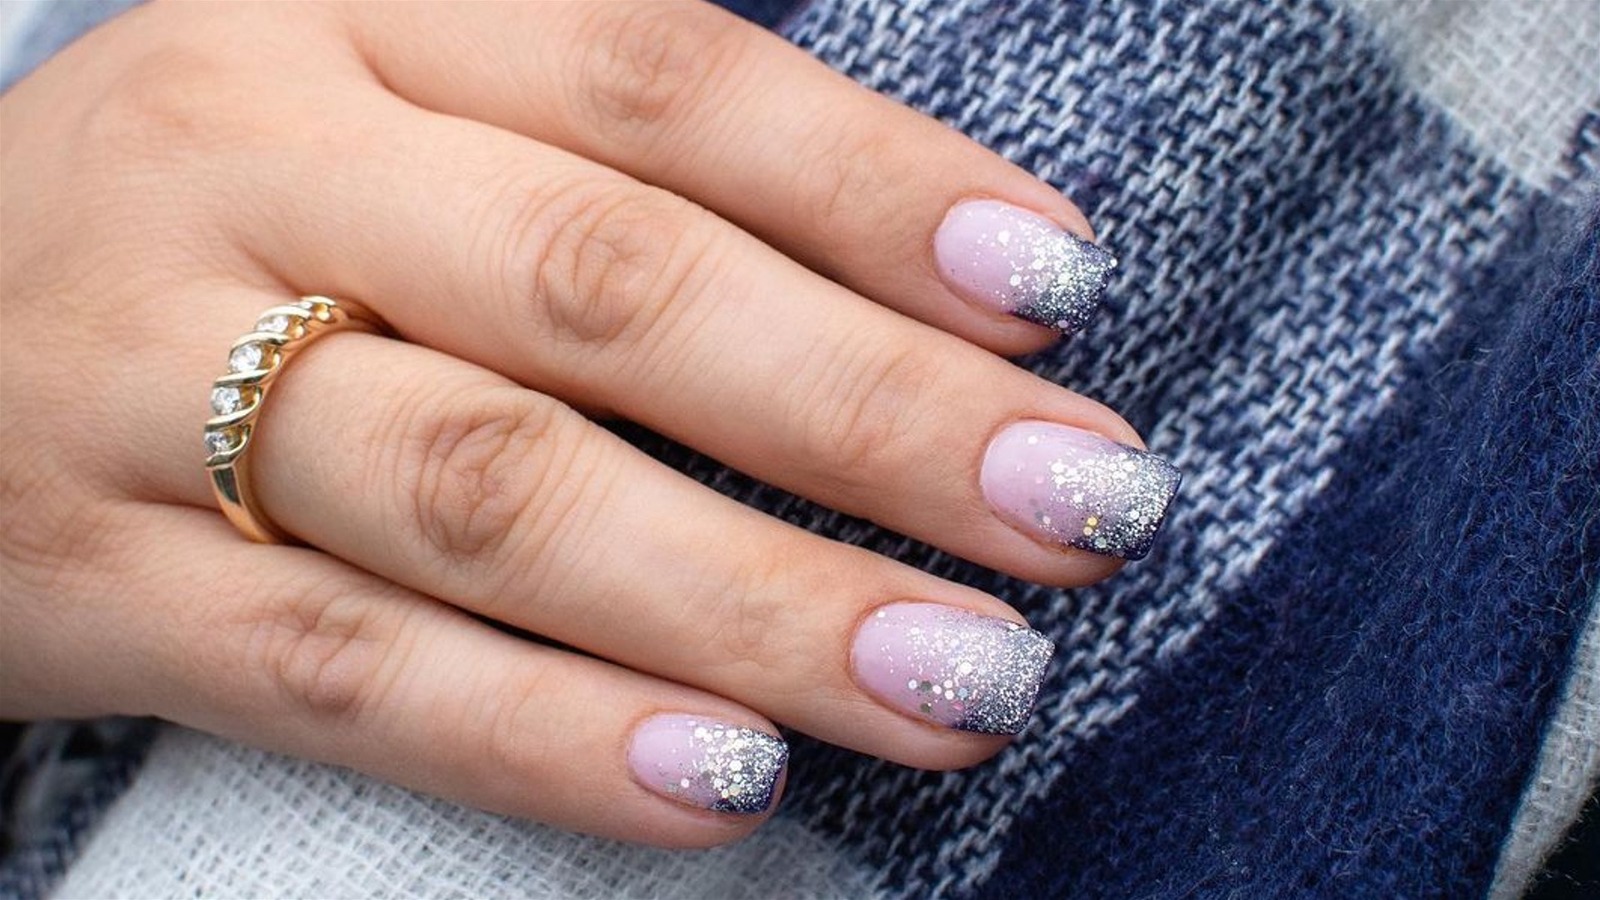 Glitter nails tutorial: The easiest way to create sparkly nail art